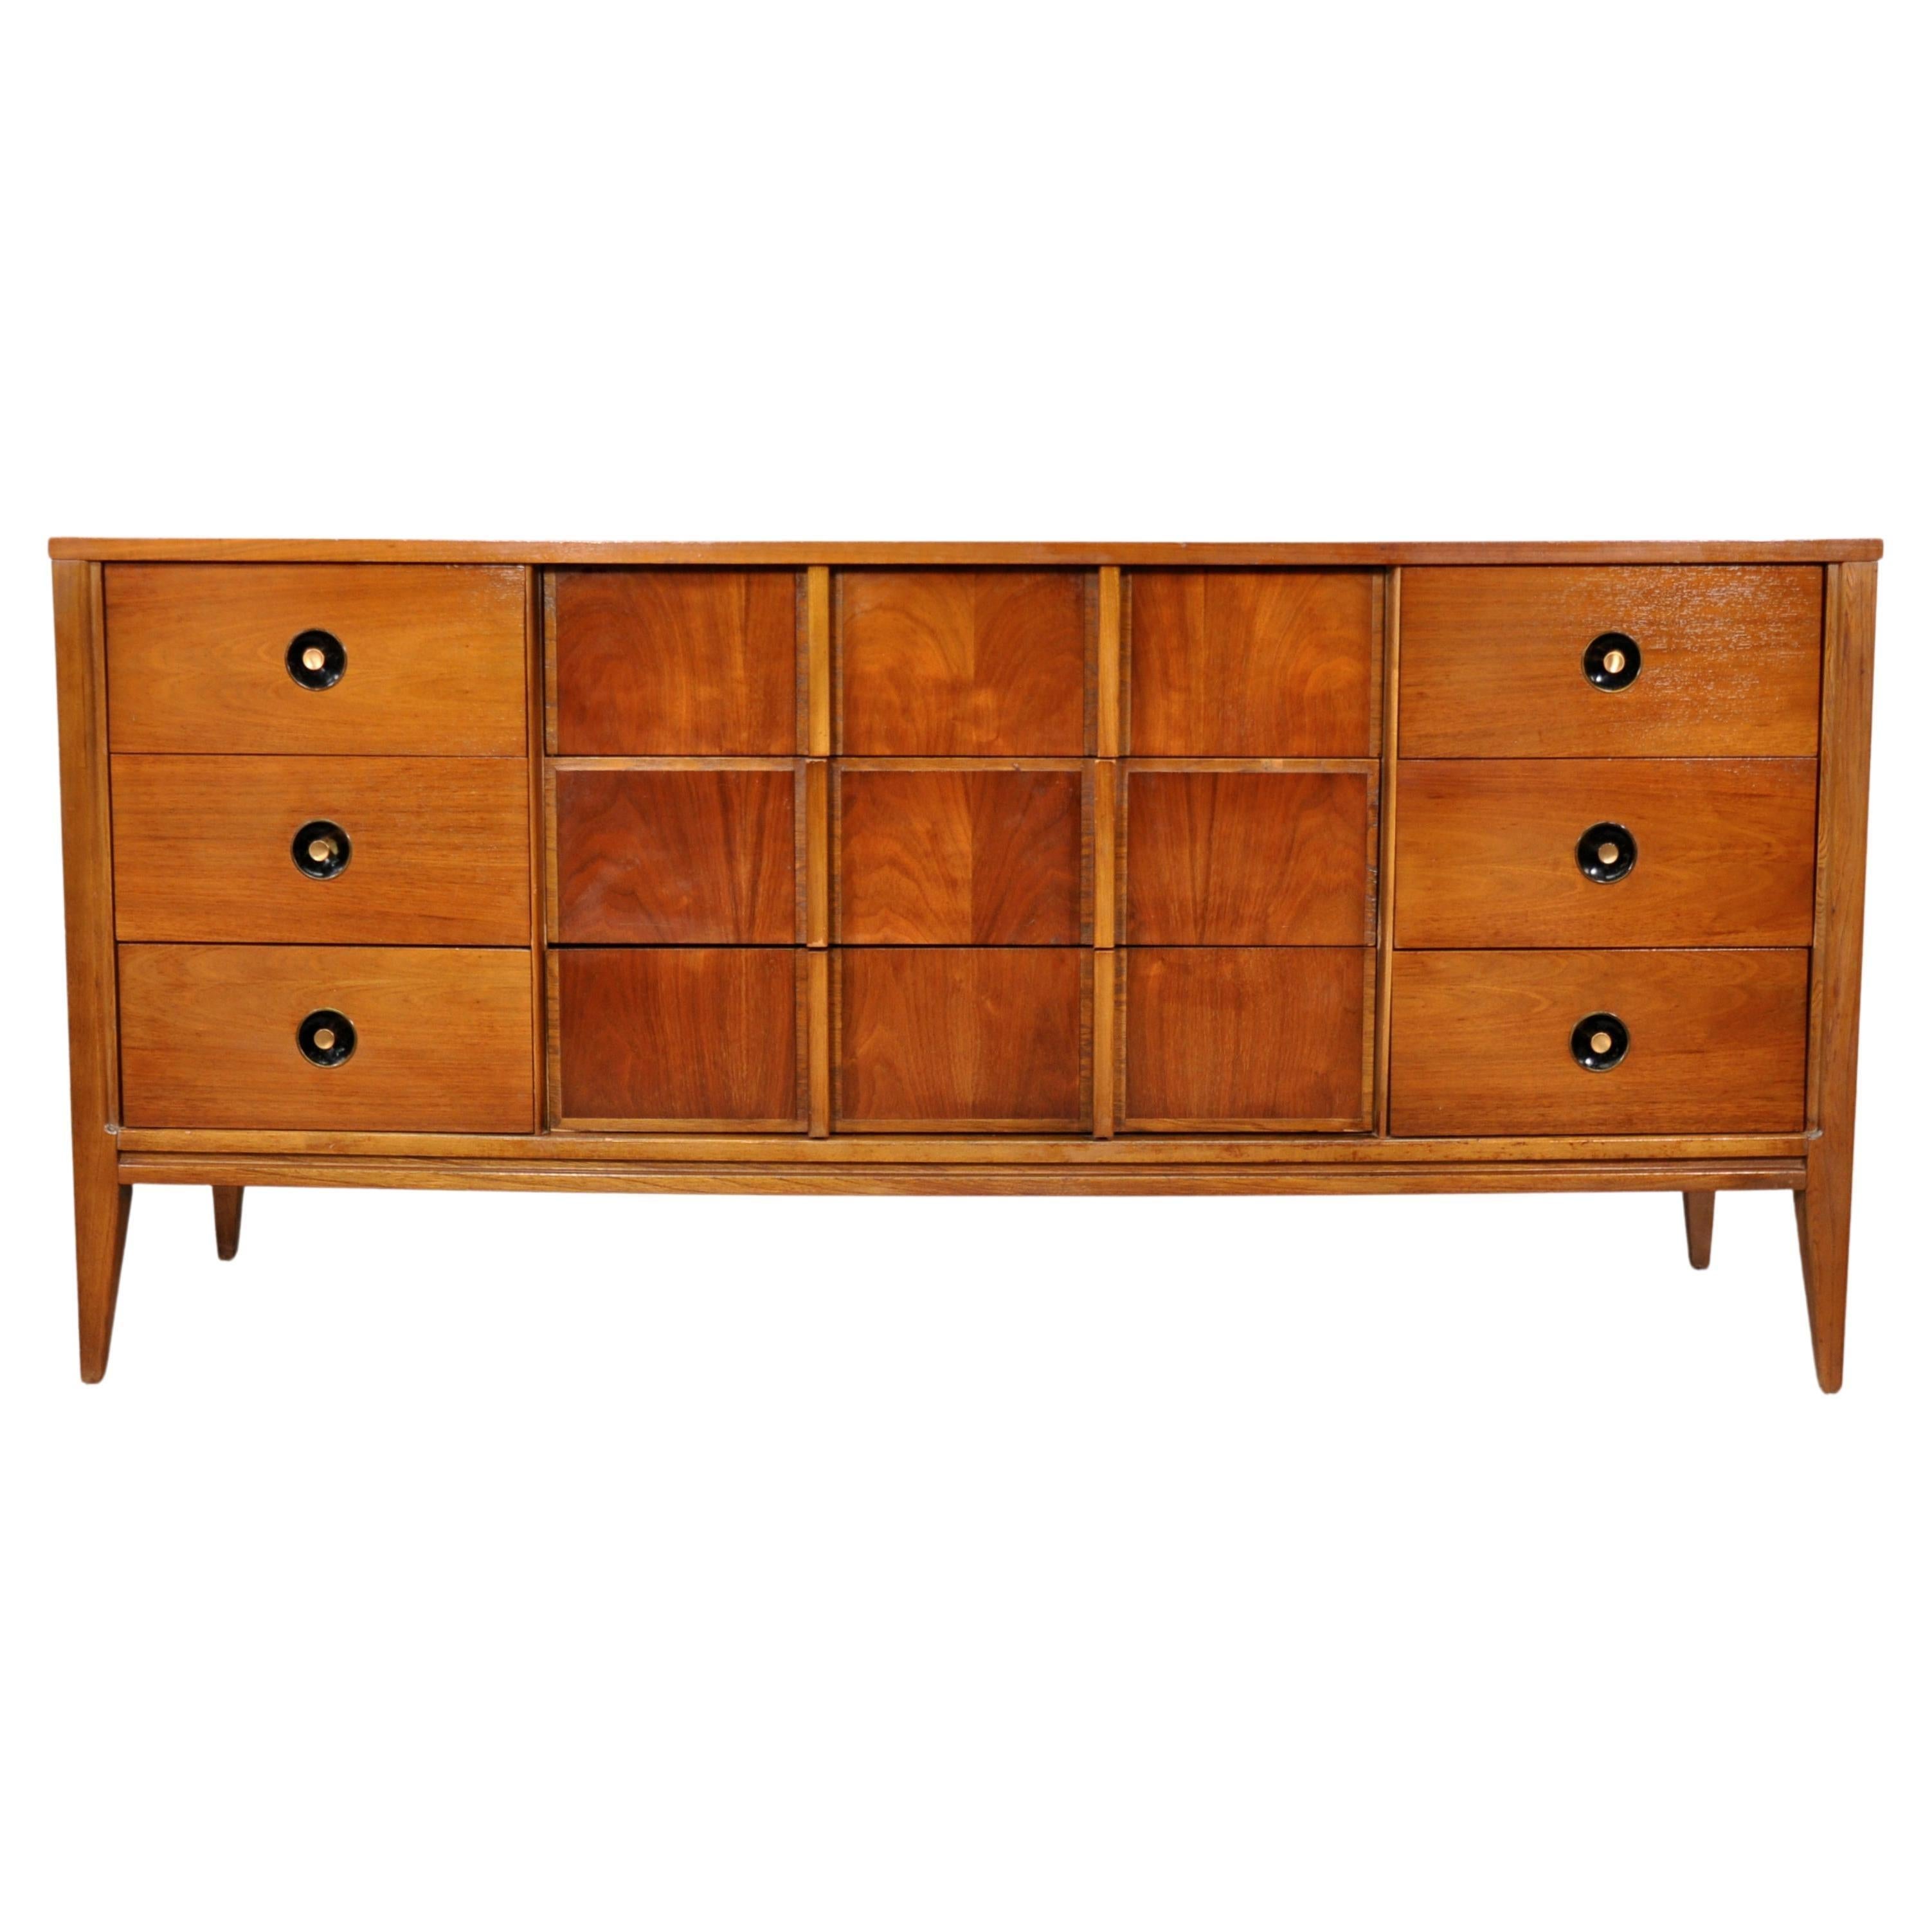 Mid-Century Modern bedroom set including a walnut and brass triple dresser and mirror by Stanley Furniture. The vintage credenza features 9 drawers, recessed black hardware with brass pulls, oak interiors and beautiful walnut grain. A ton of storage